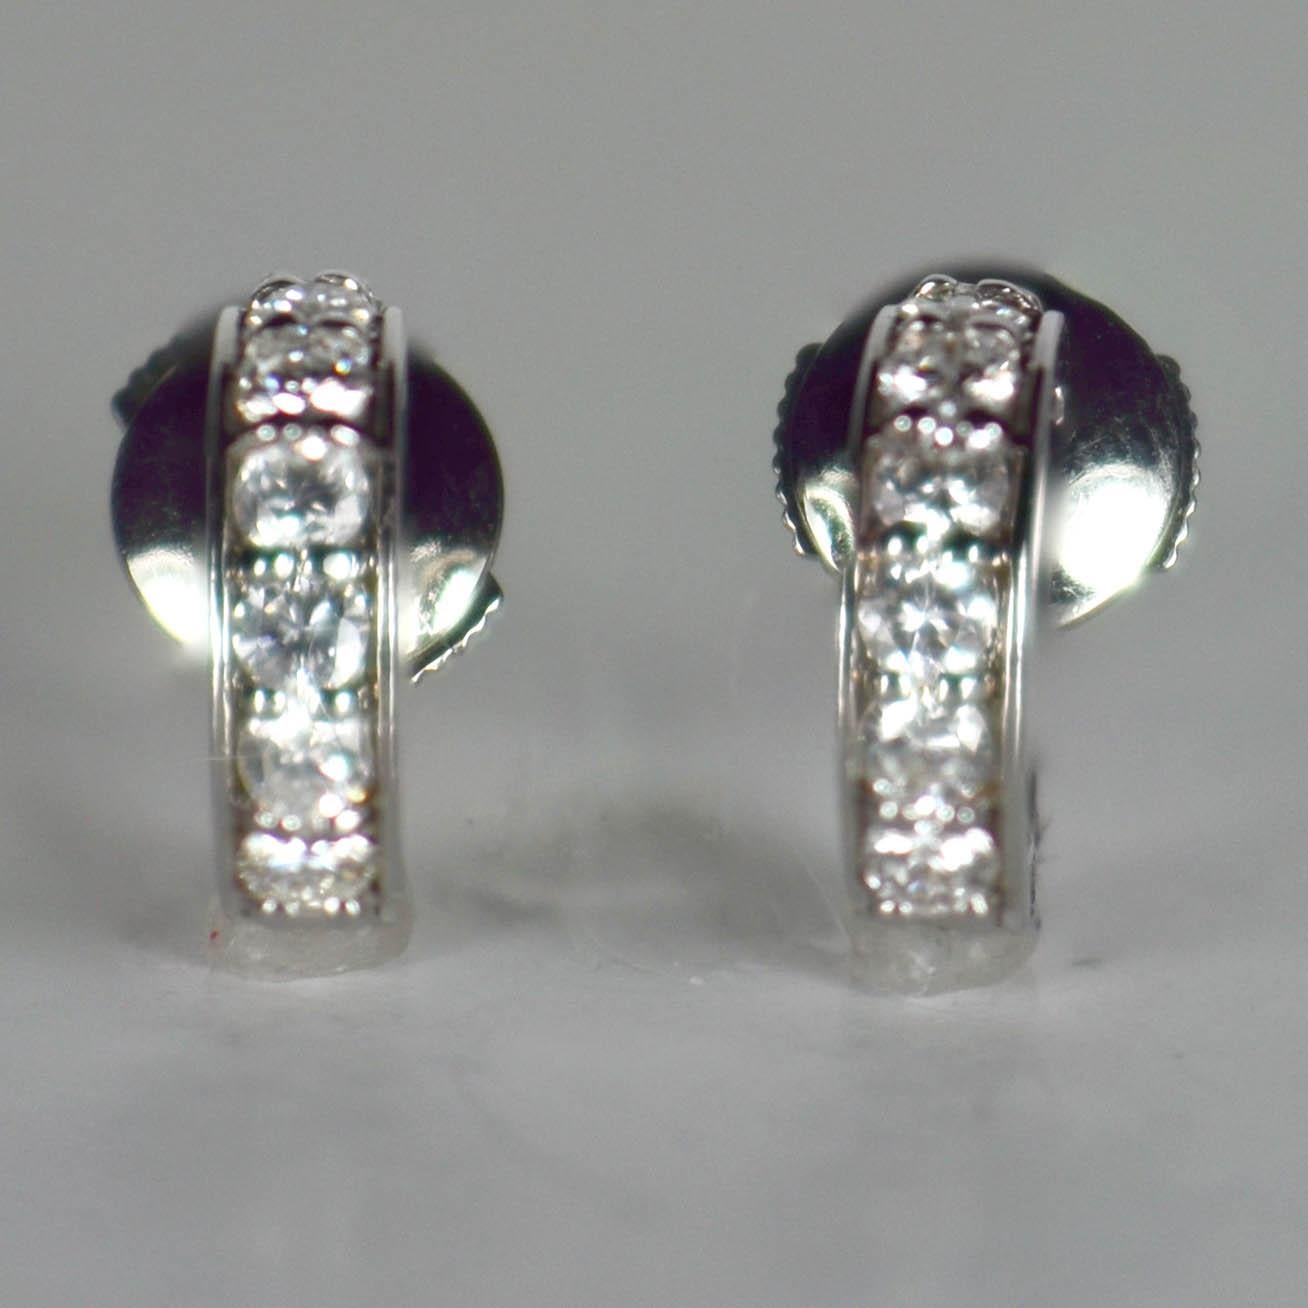 A pair of French huggie style hoop earrings in 18 karat white gold set with a total of 14 round brilliant cut white diamonds with a total approximate weight of 1.12 carats.
Marked with the eagles head for 18 karat gold and an unidentifiable makers